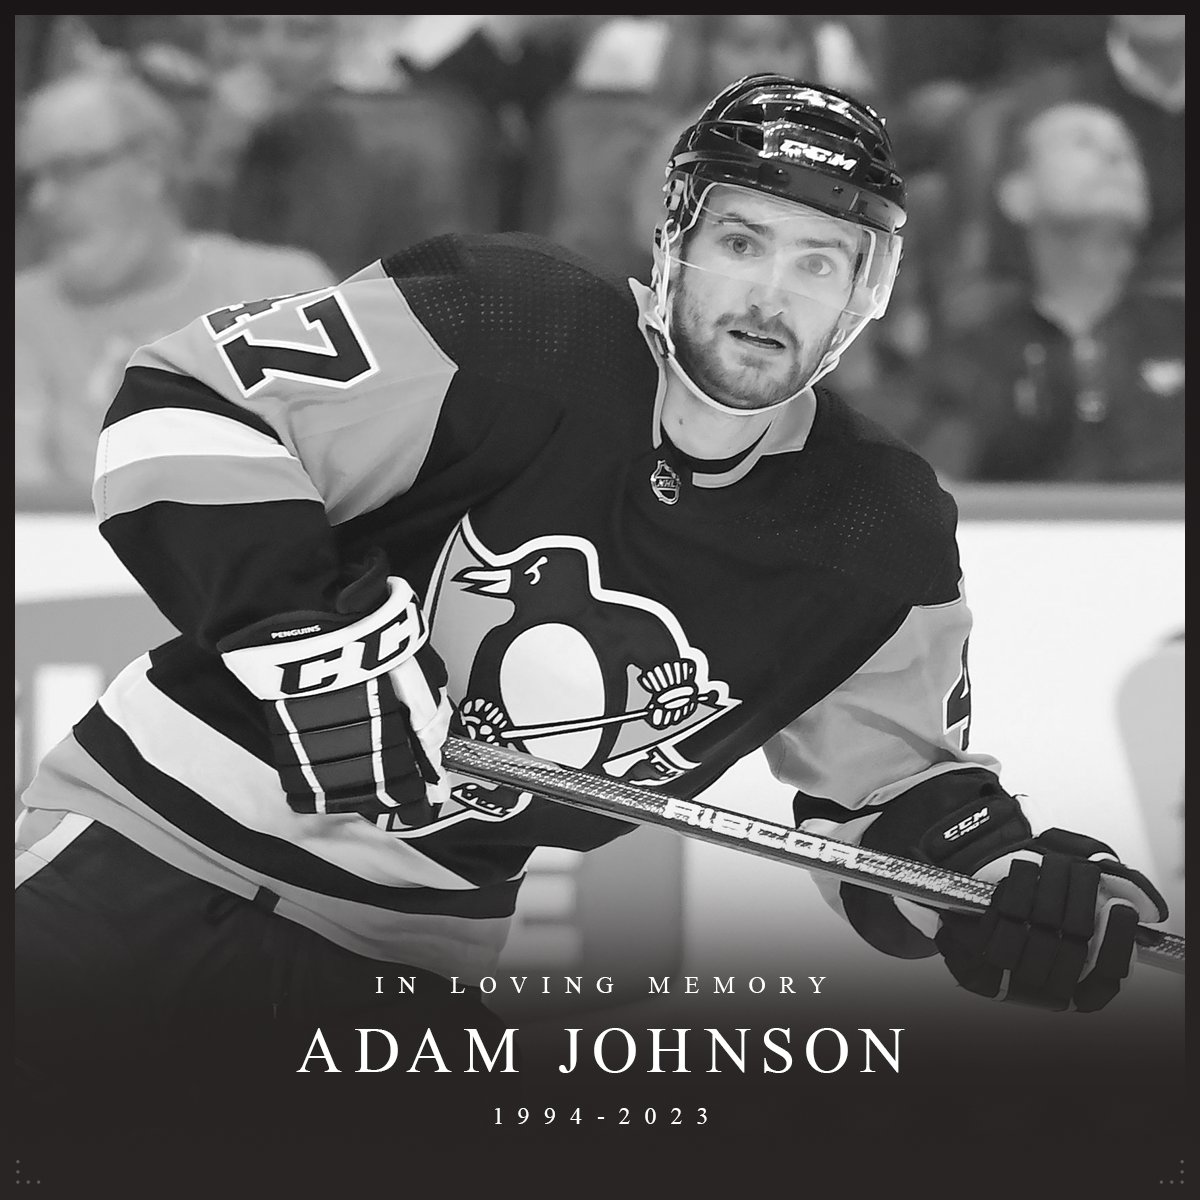 The National Hockey League family mourns the passing of former Pittsburgh Penguin Adam Johnson. Our prayers and deepest condolences go to his family, friends and teammates. media.nhl.com/public/news/17…